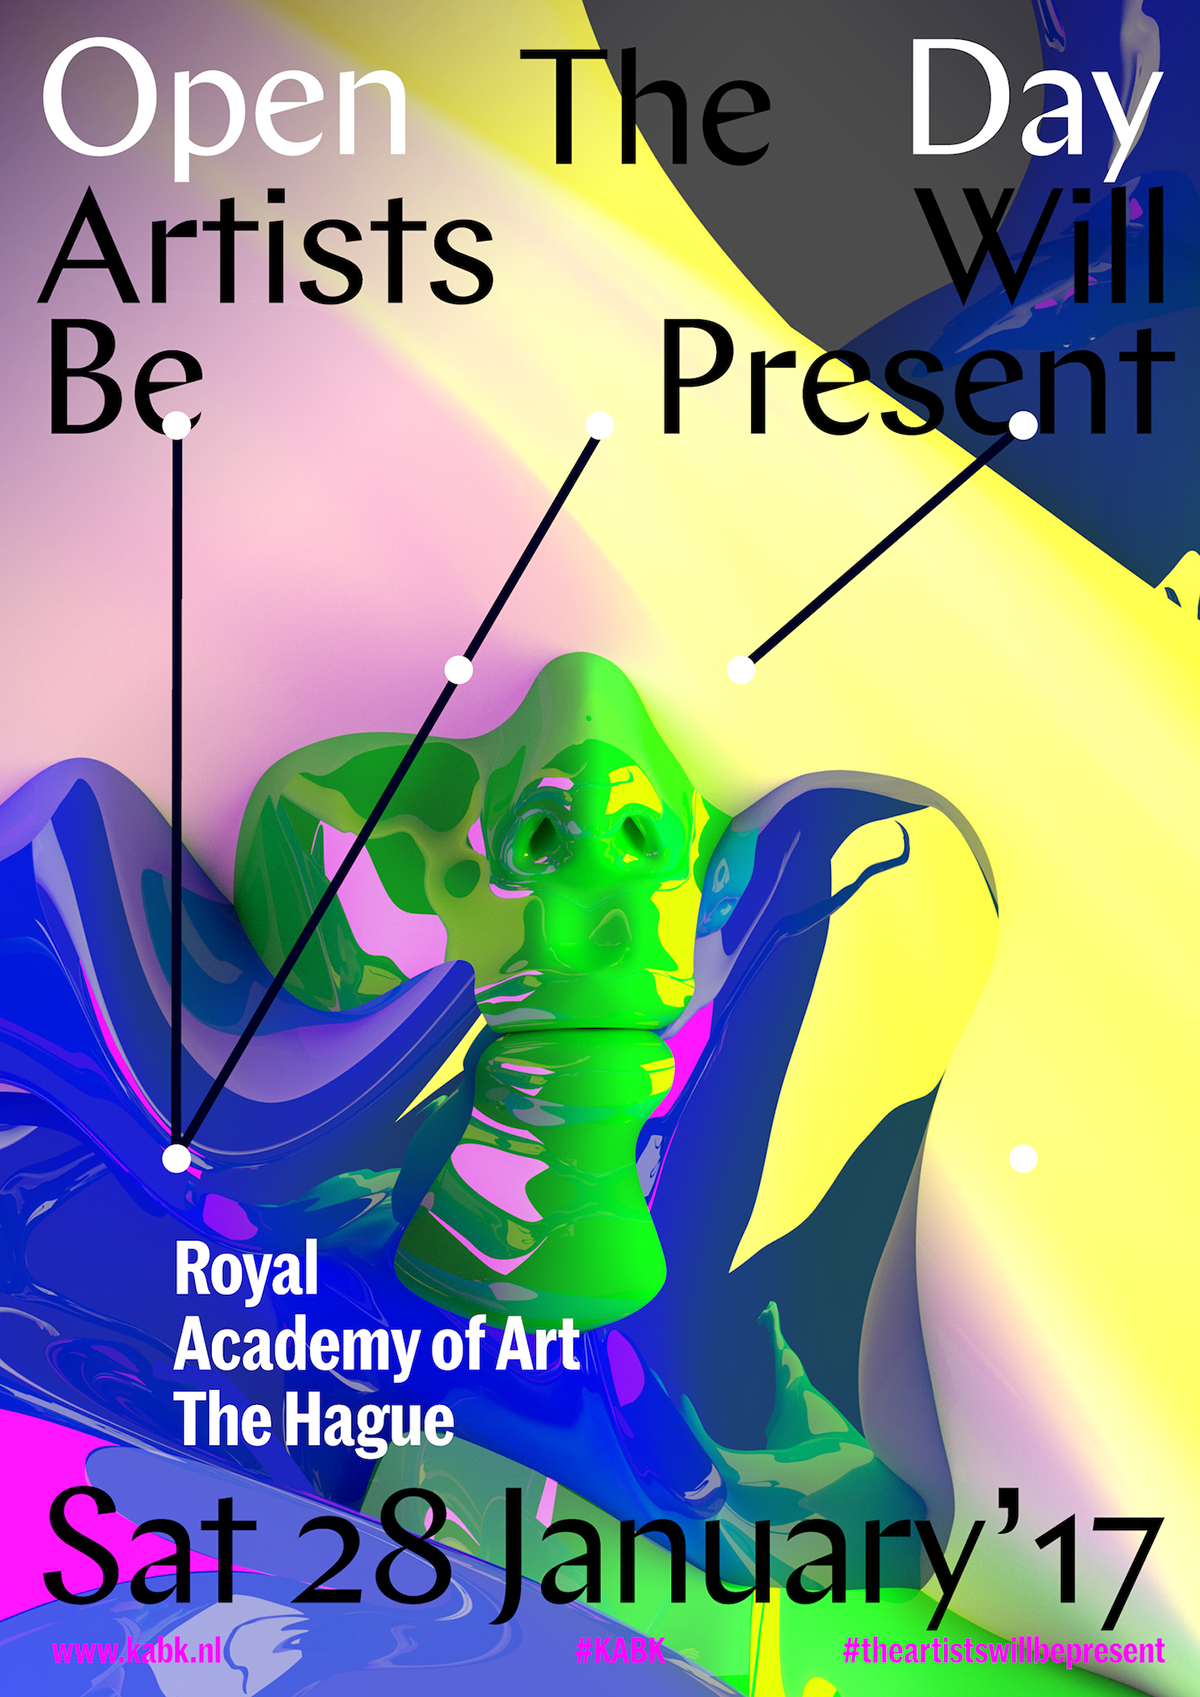 Open Day 2017 - Royal Academy of Art, The Hague on Behance